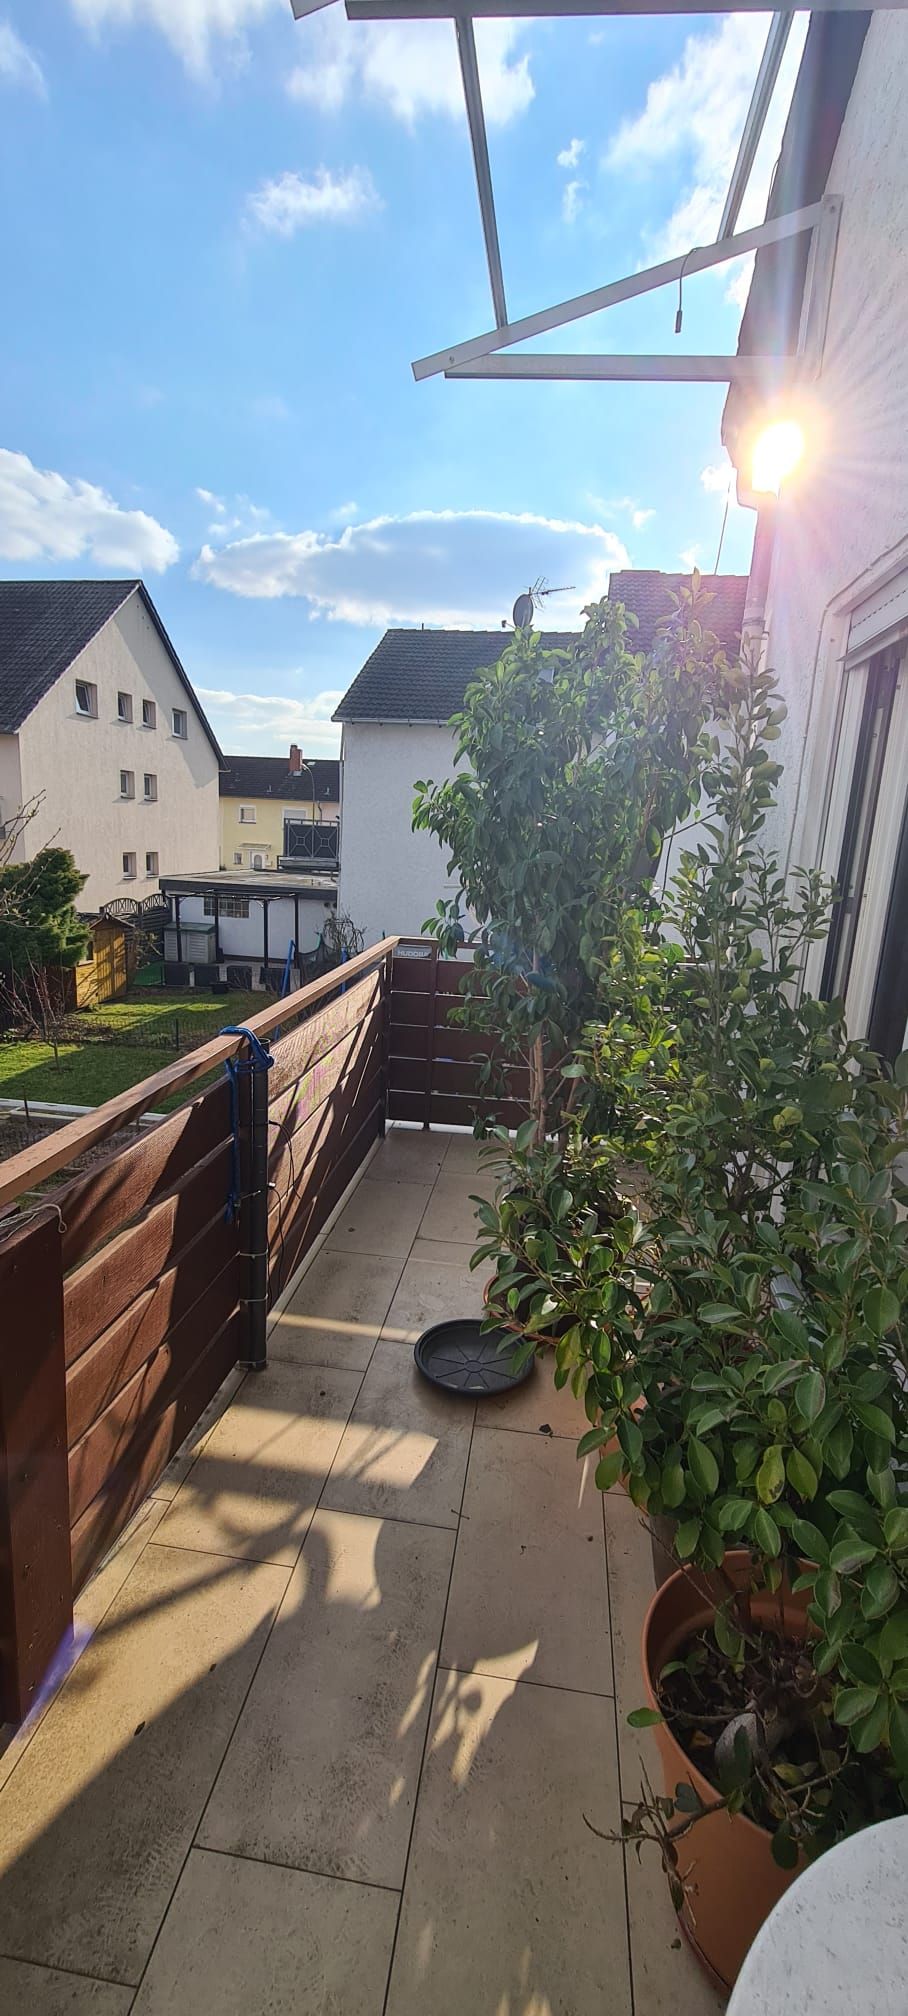 House with garden and balcony in perfect location